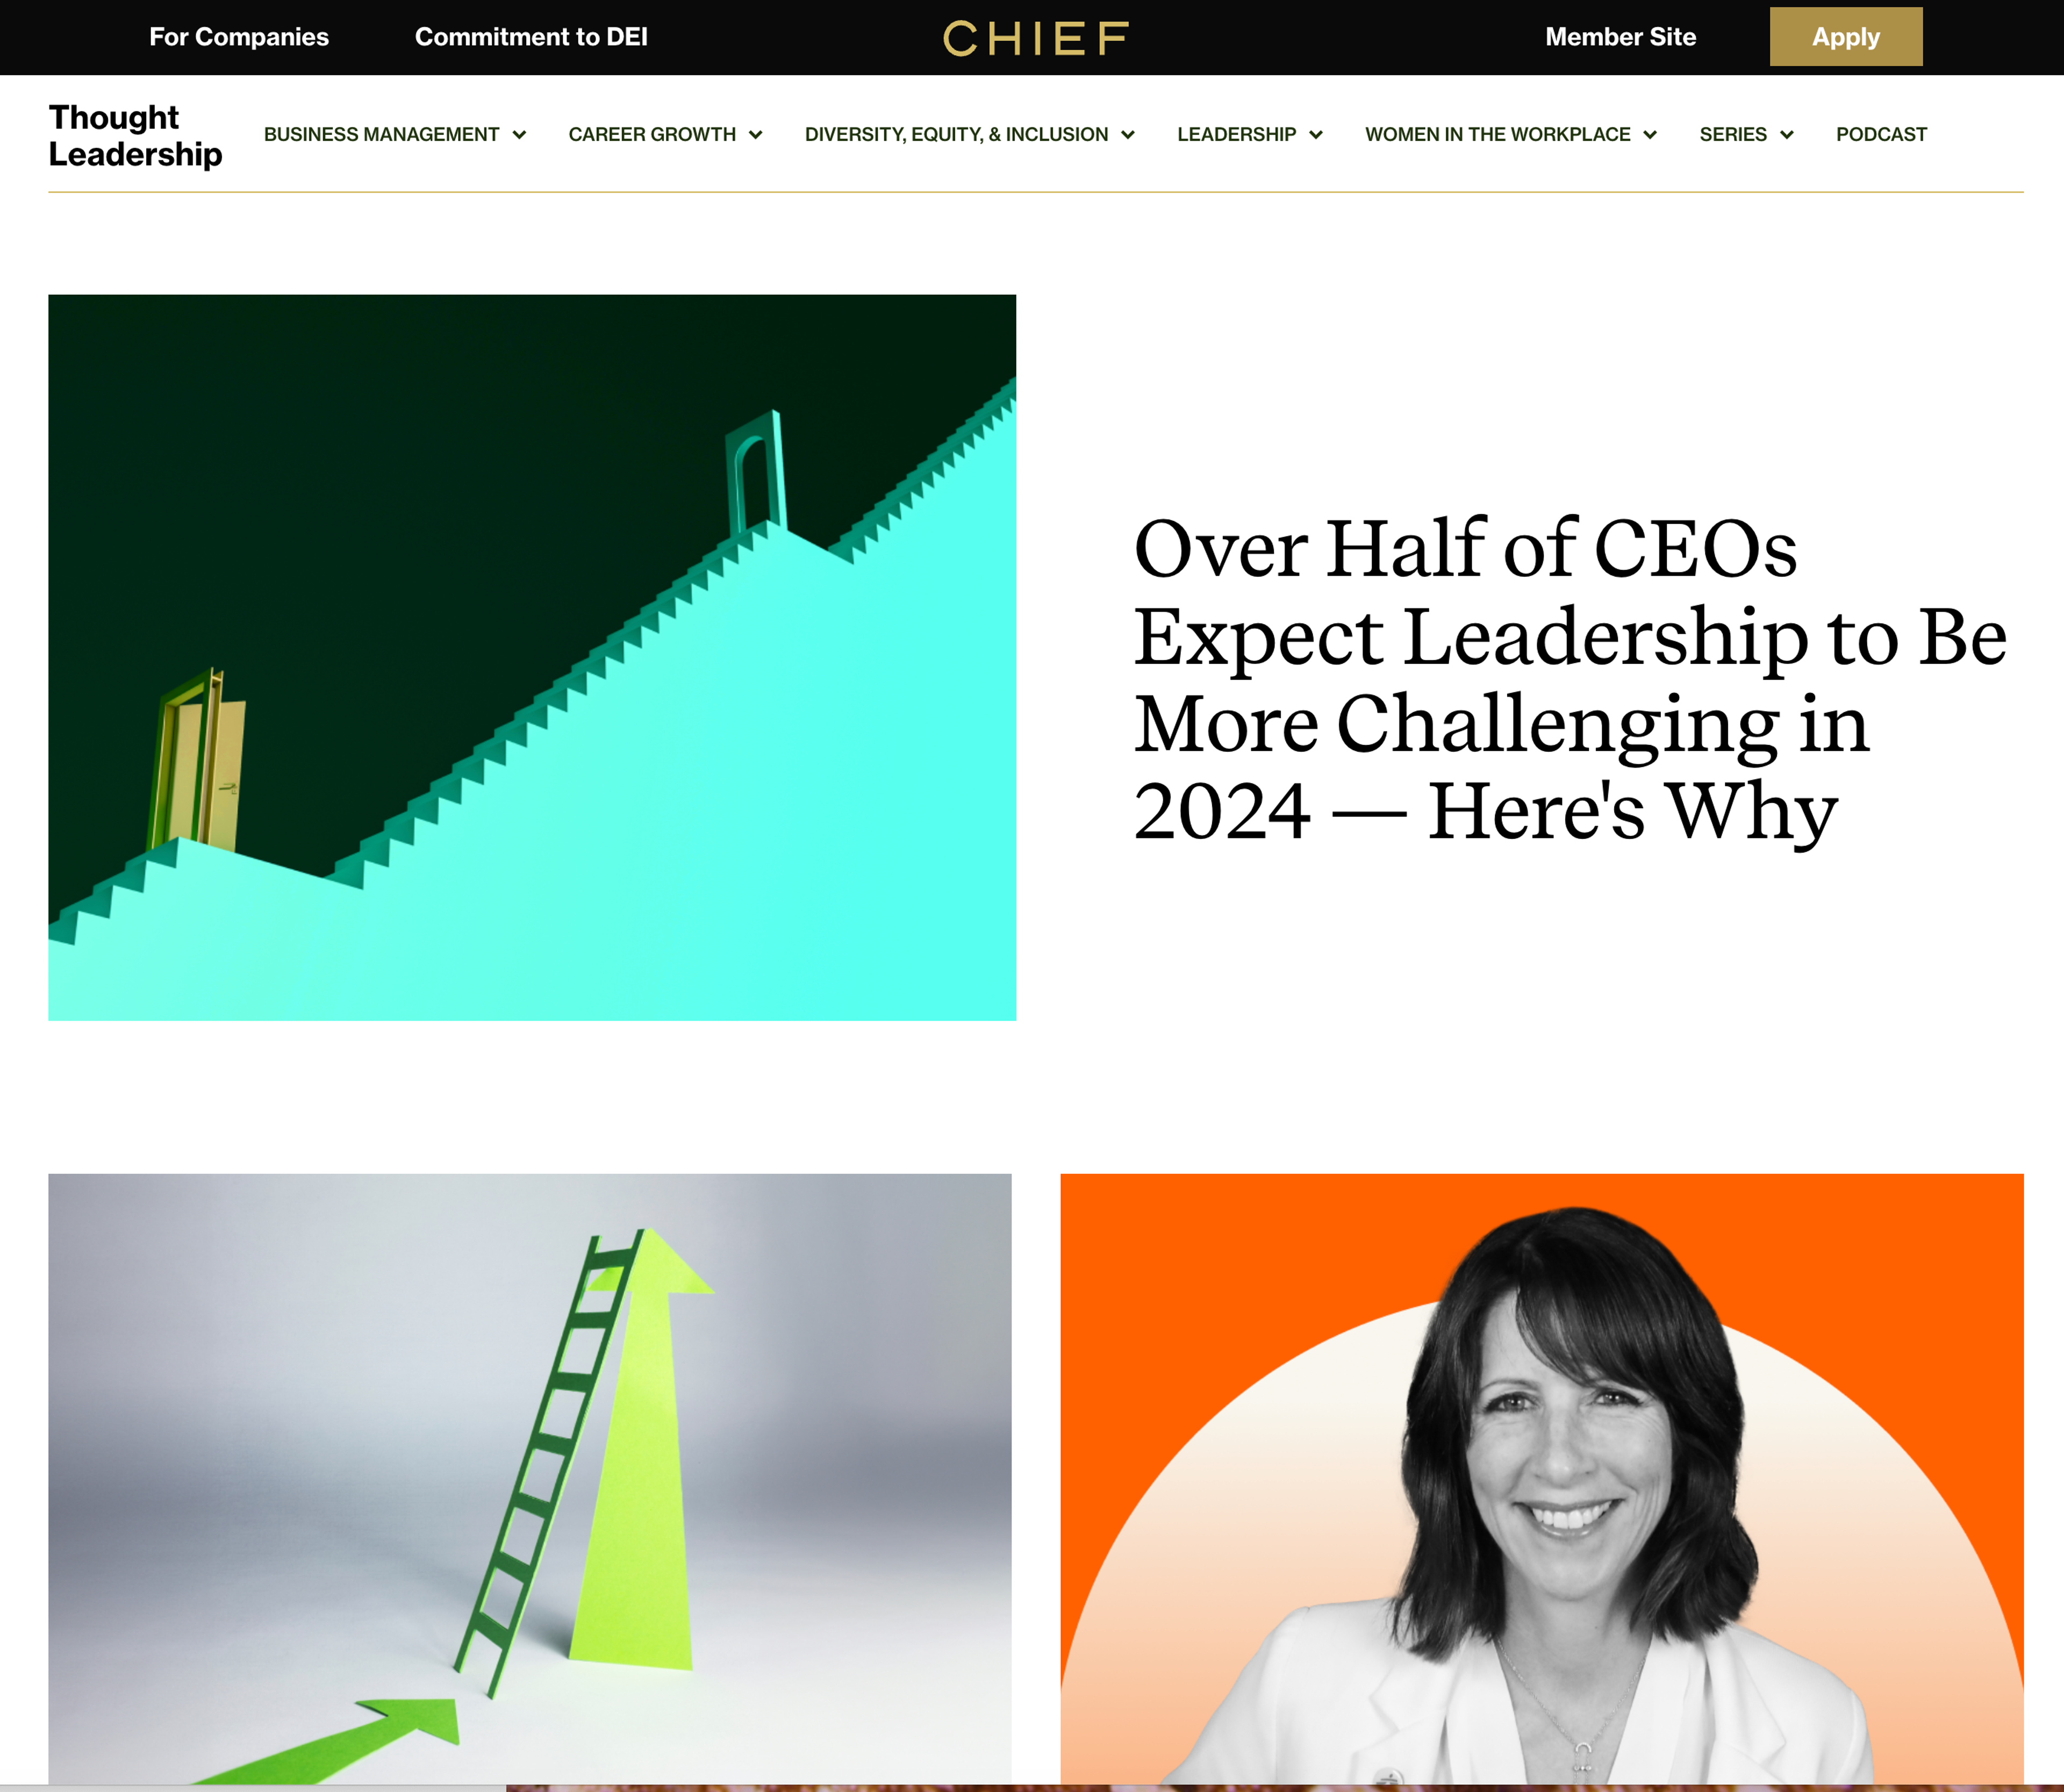 a website called chief shows a woman on the homepage